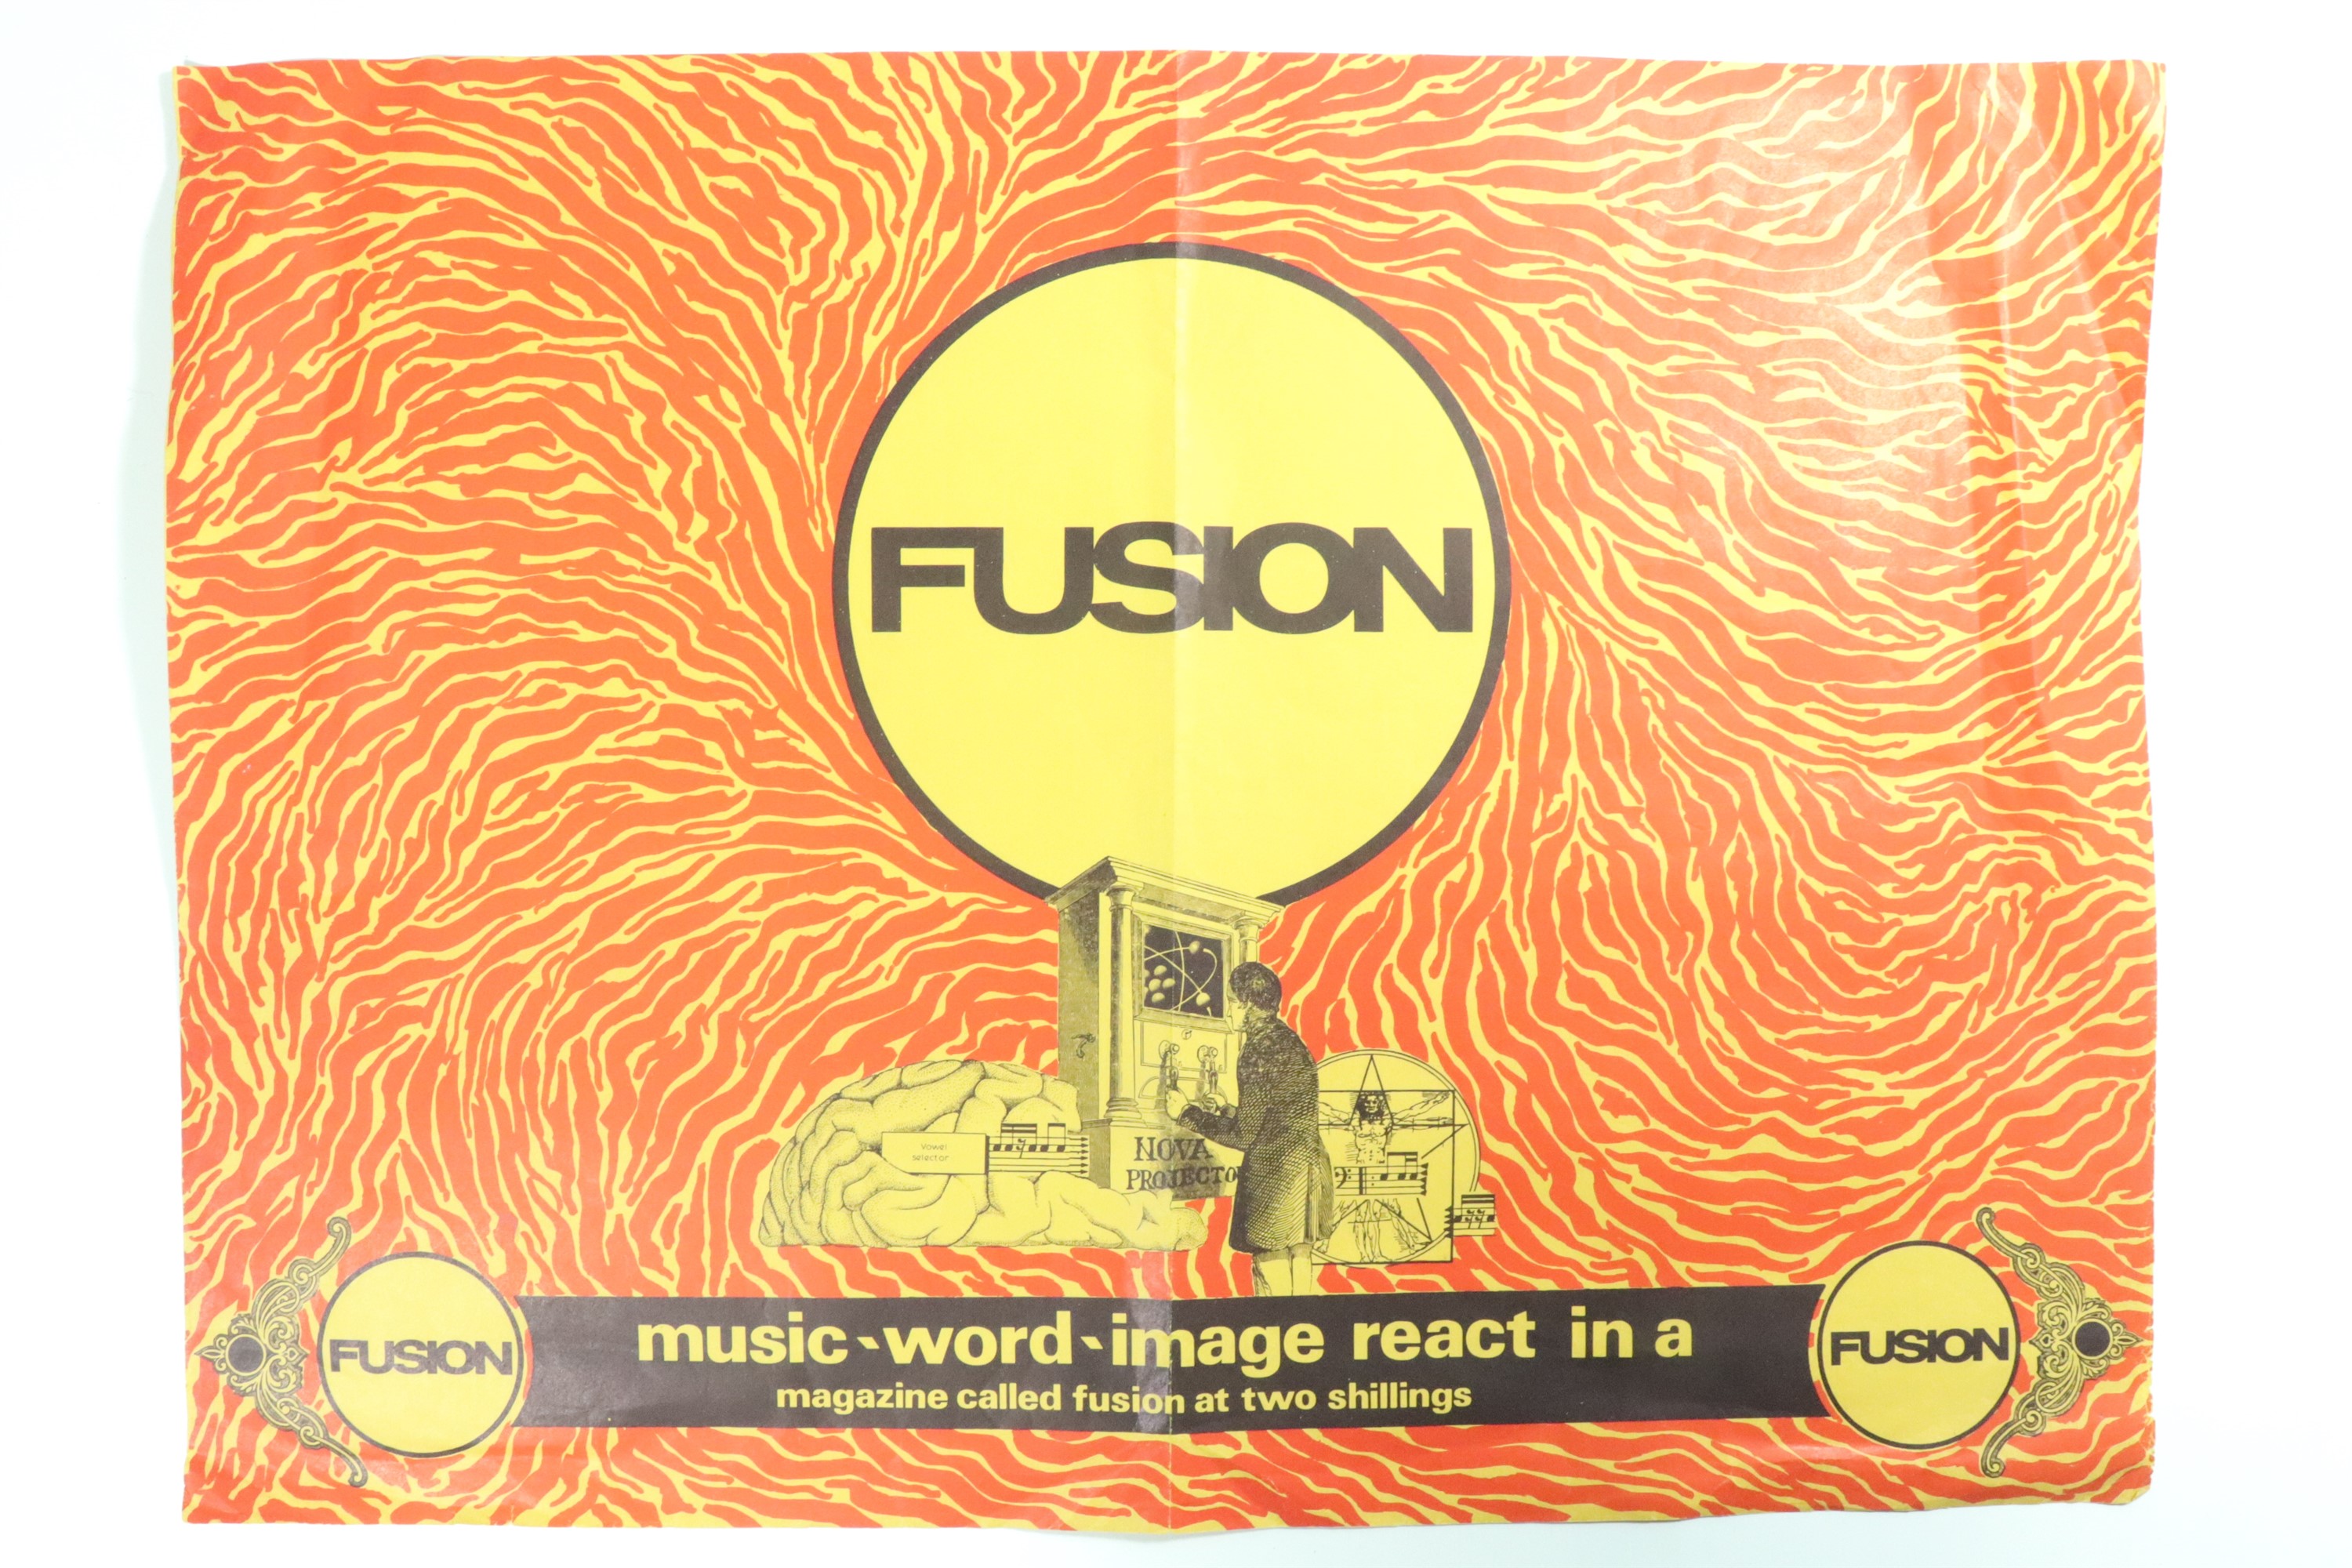 A 1960s printed poster promoting the magazine "Fusion", 36 cm x 50 cm - Image 2 of 2